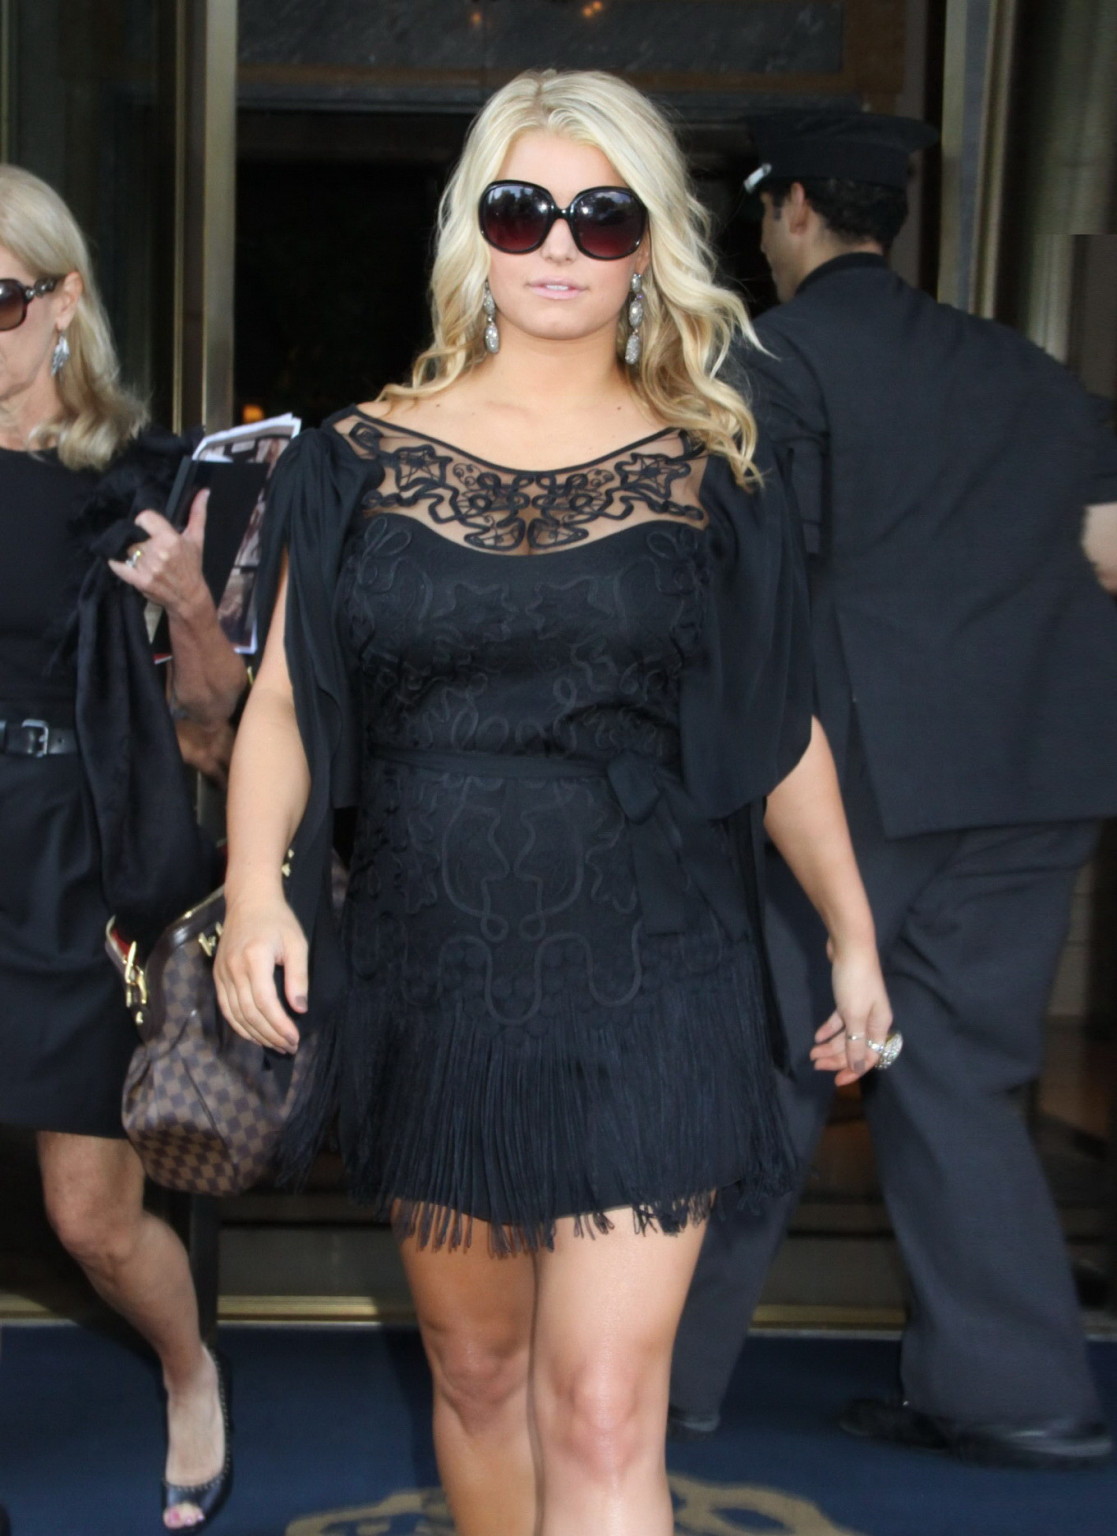 Jessica Simpson Looks Very Sexy In Black Mini Dress Leaving The Ritz Carlton Hot Porn Pictures